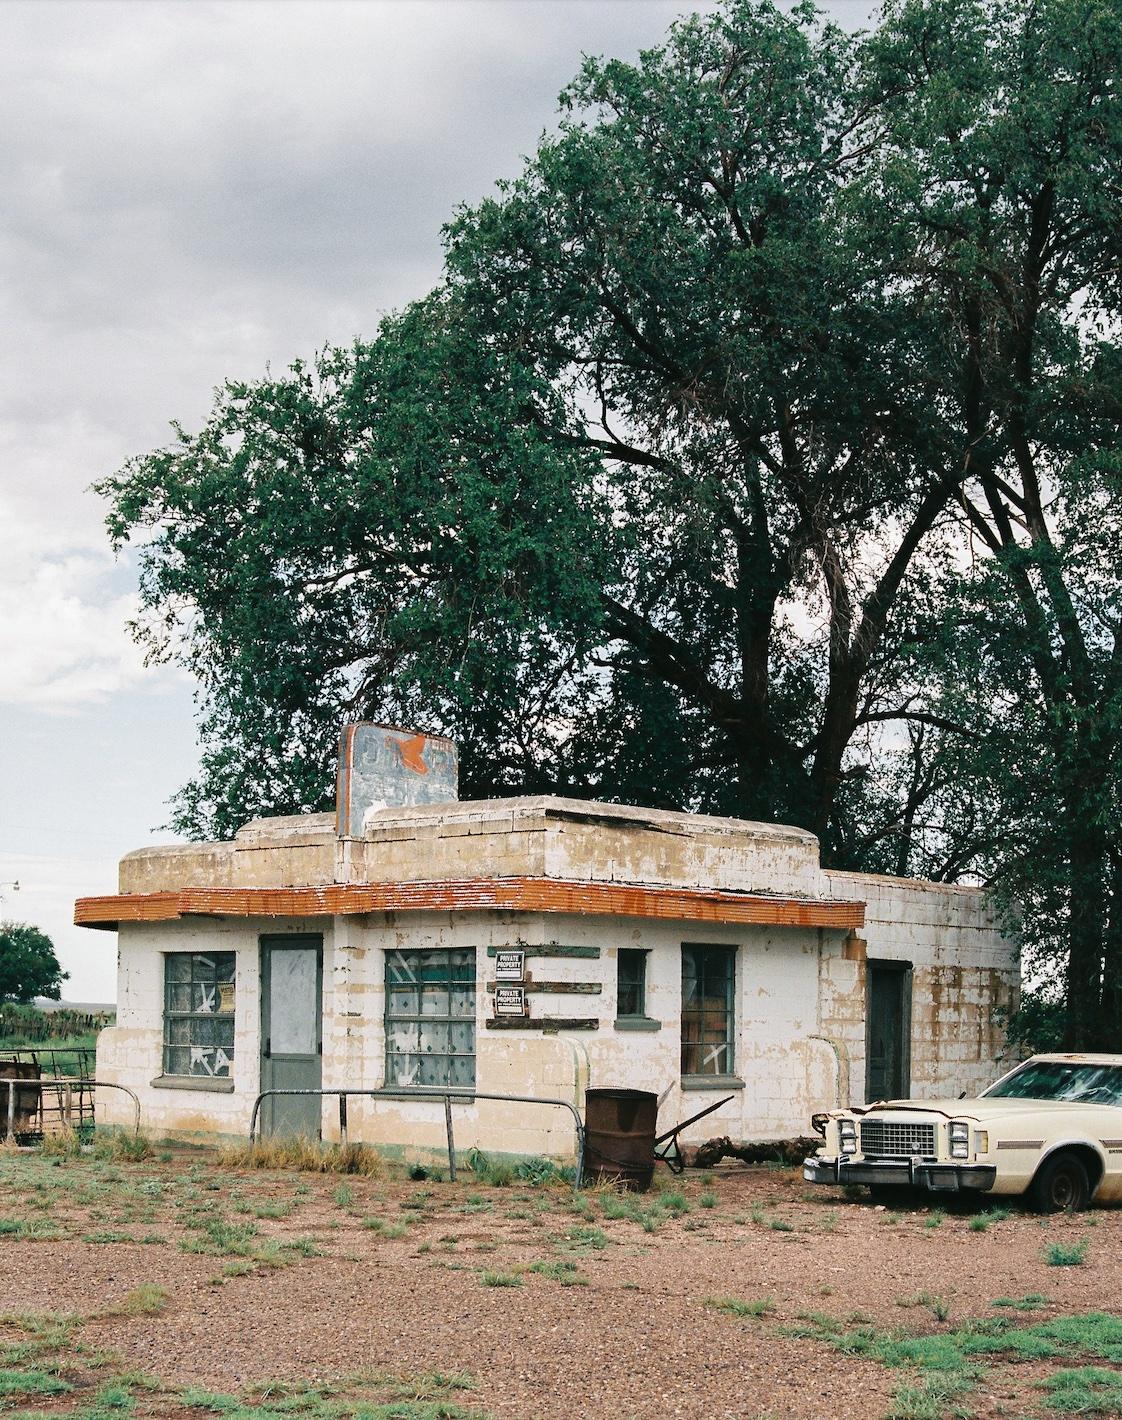 American Vintage, 2022, Hereford, NM, USA - Contemporary Photograph by Philippe Blayo